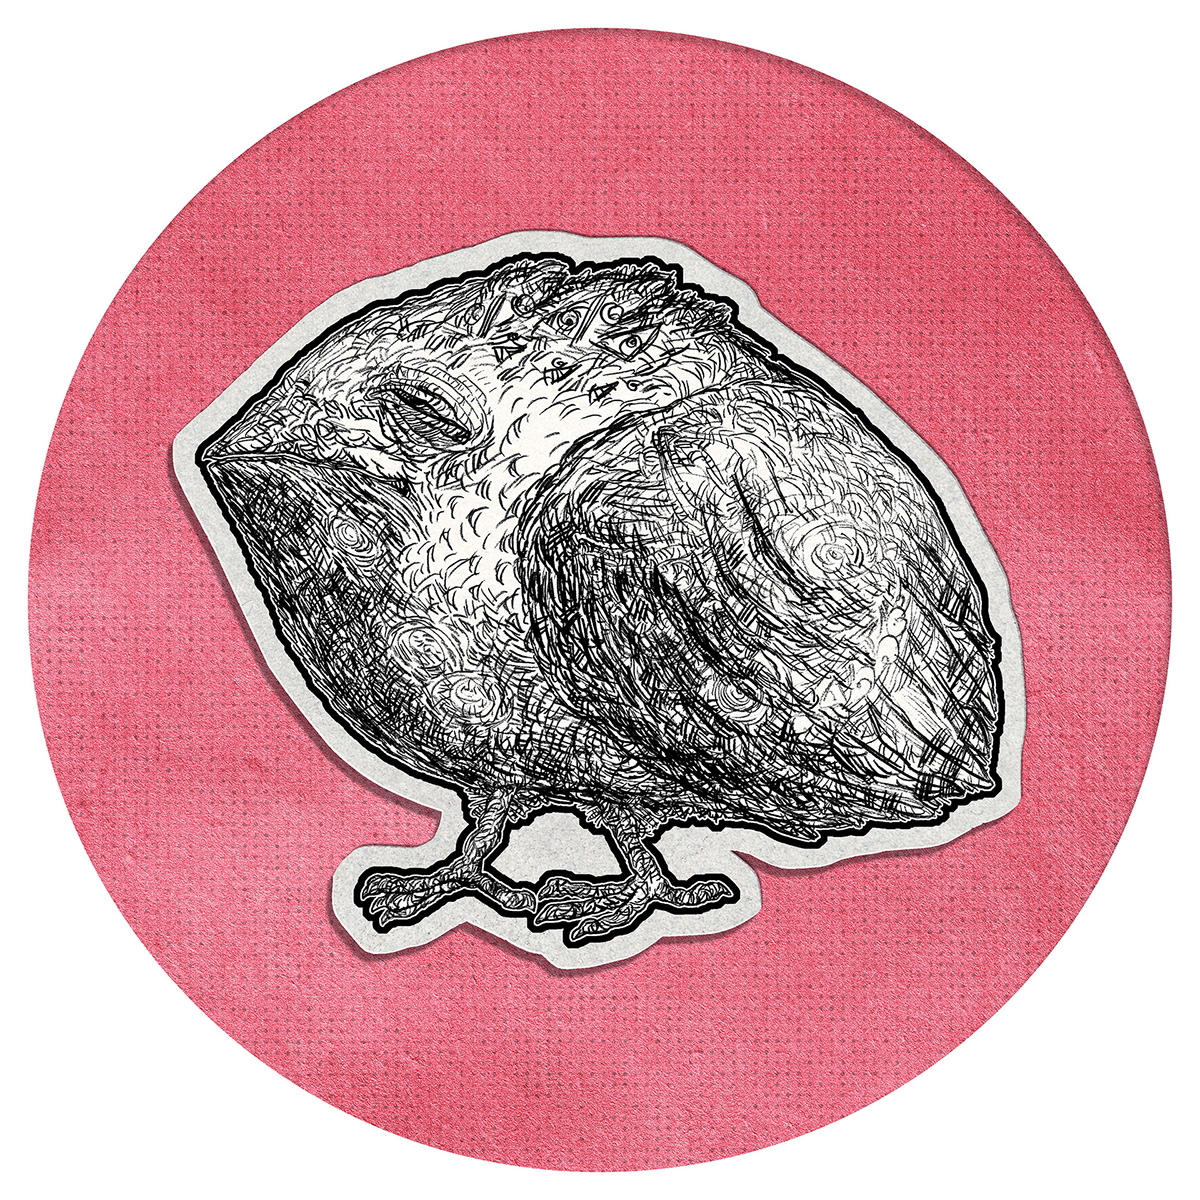 A bizarre bird is drawn with graphite using detailed lines placed on a deep pink circle background.